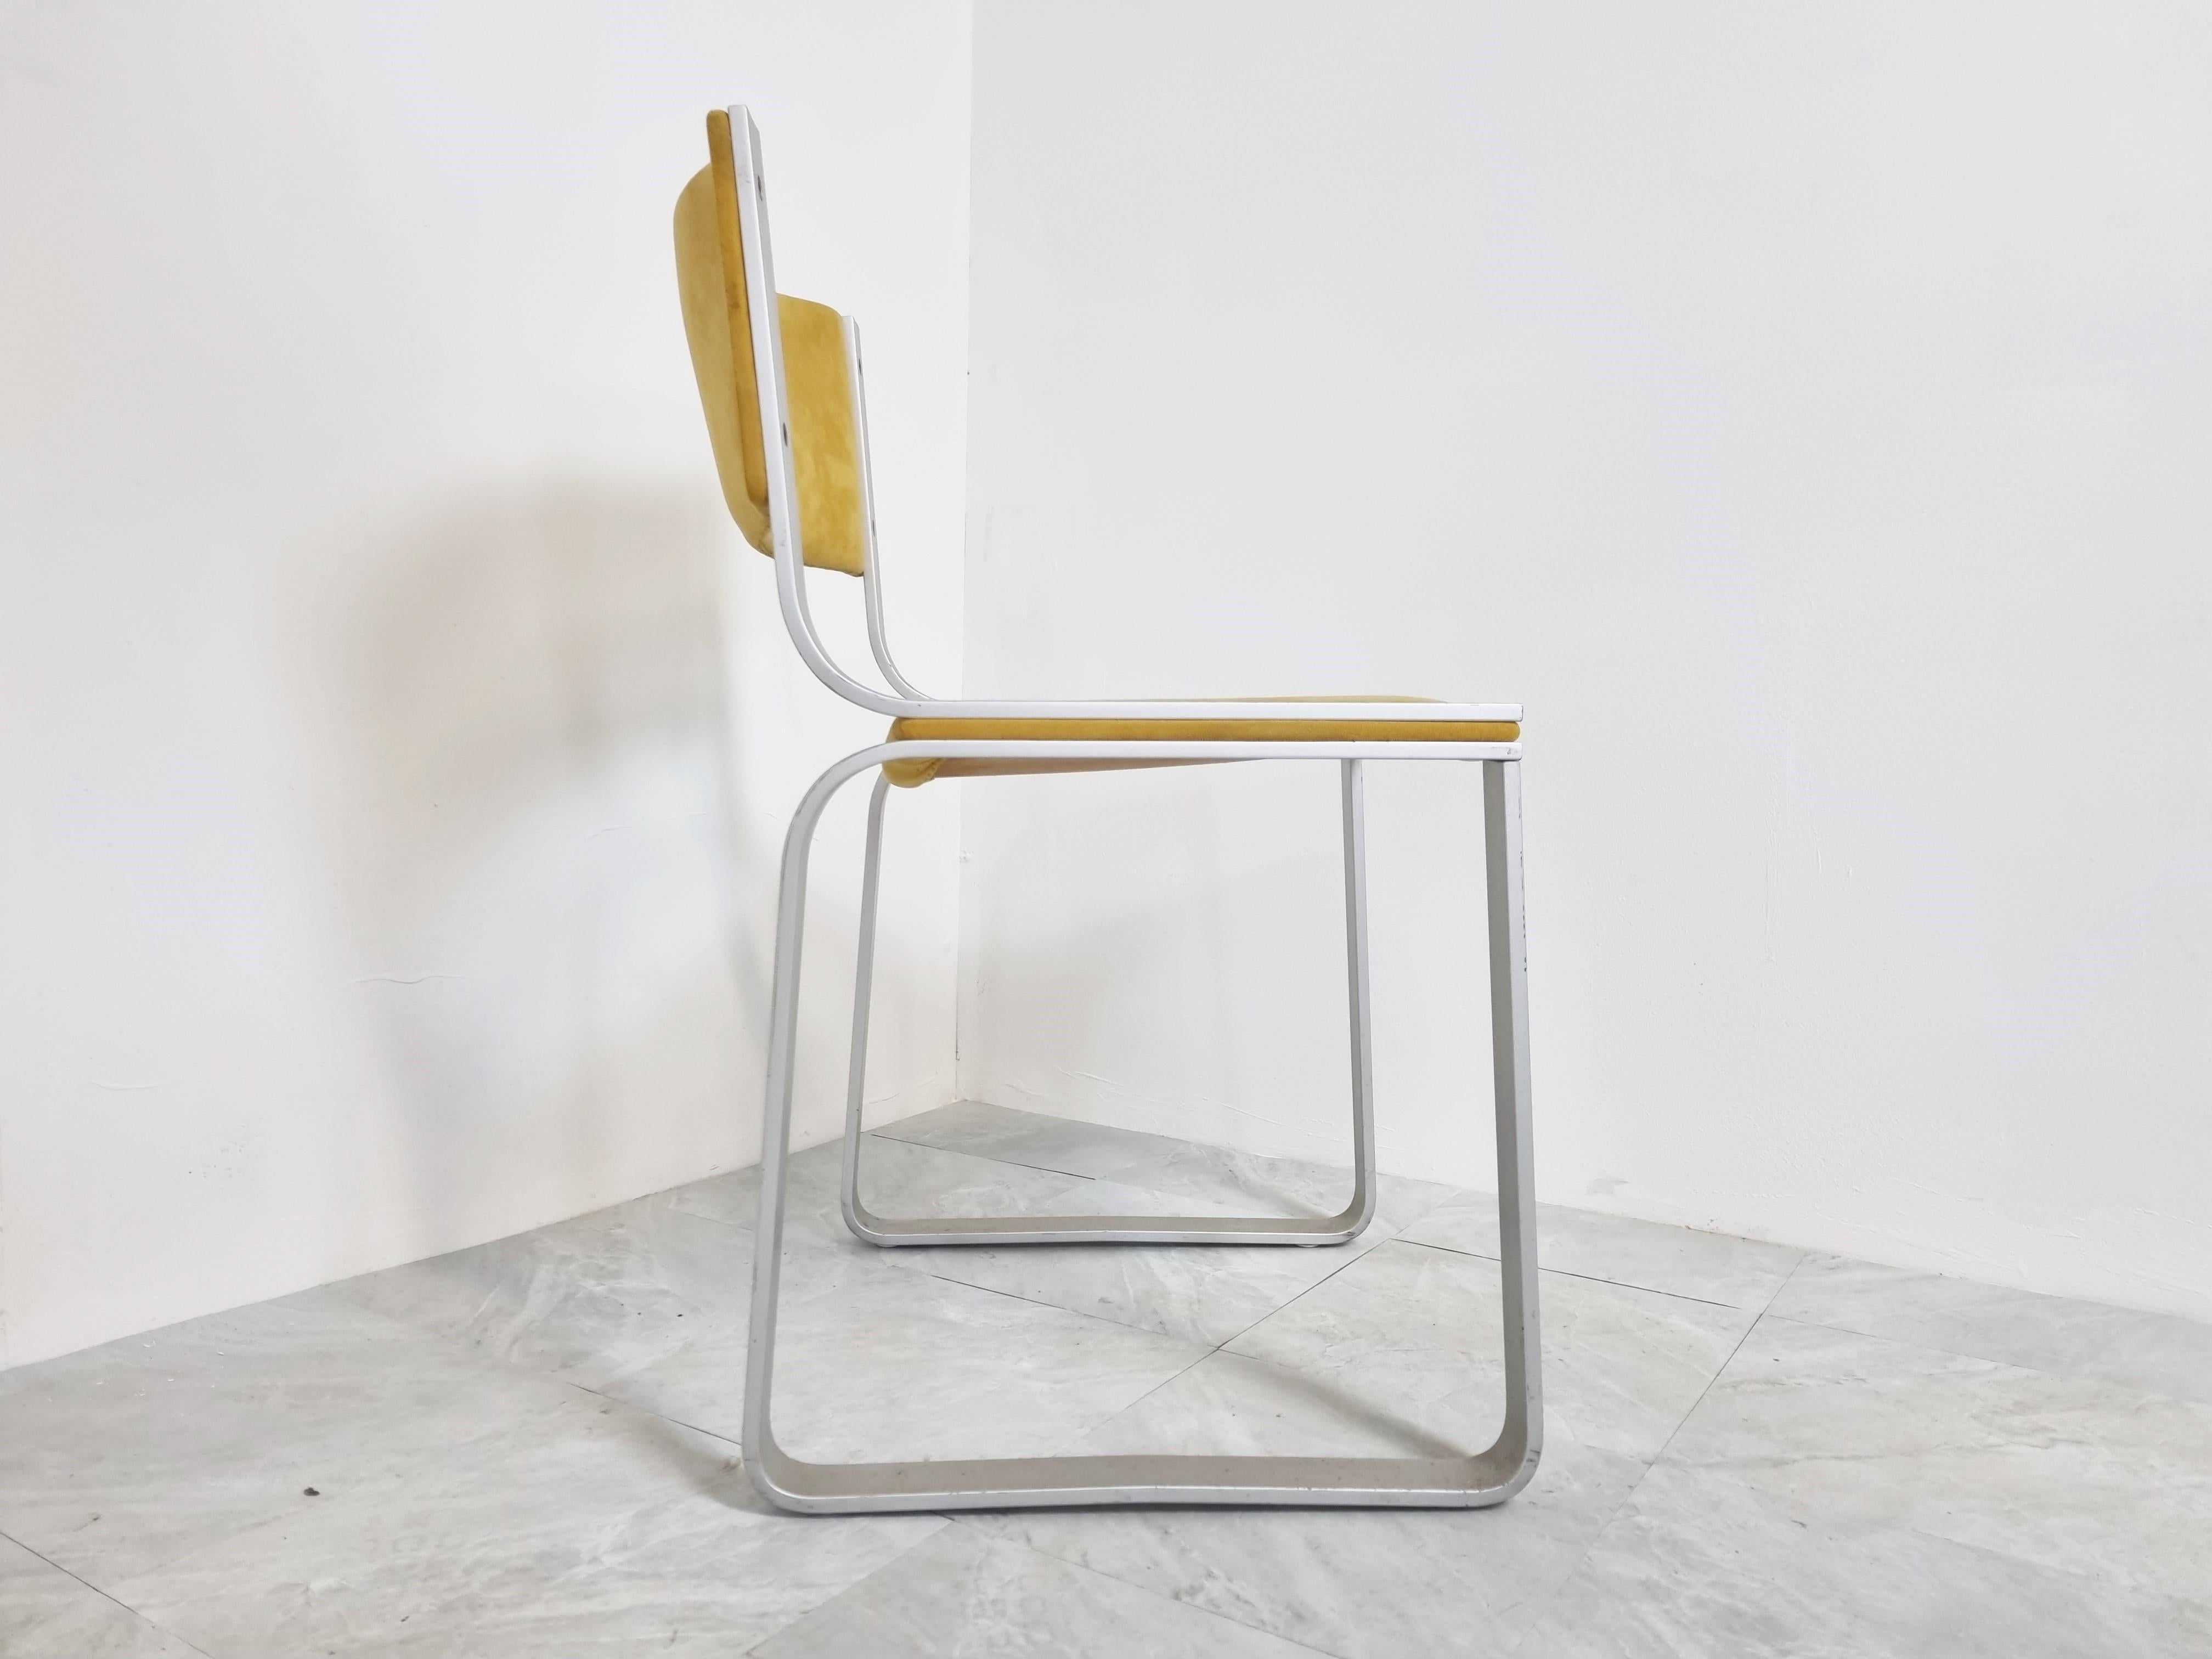 SM0301 Dining Chairs by Pierre Mazairac for Pastoe, 1970s '6 Pieces in Stock' 1